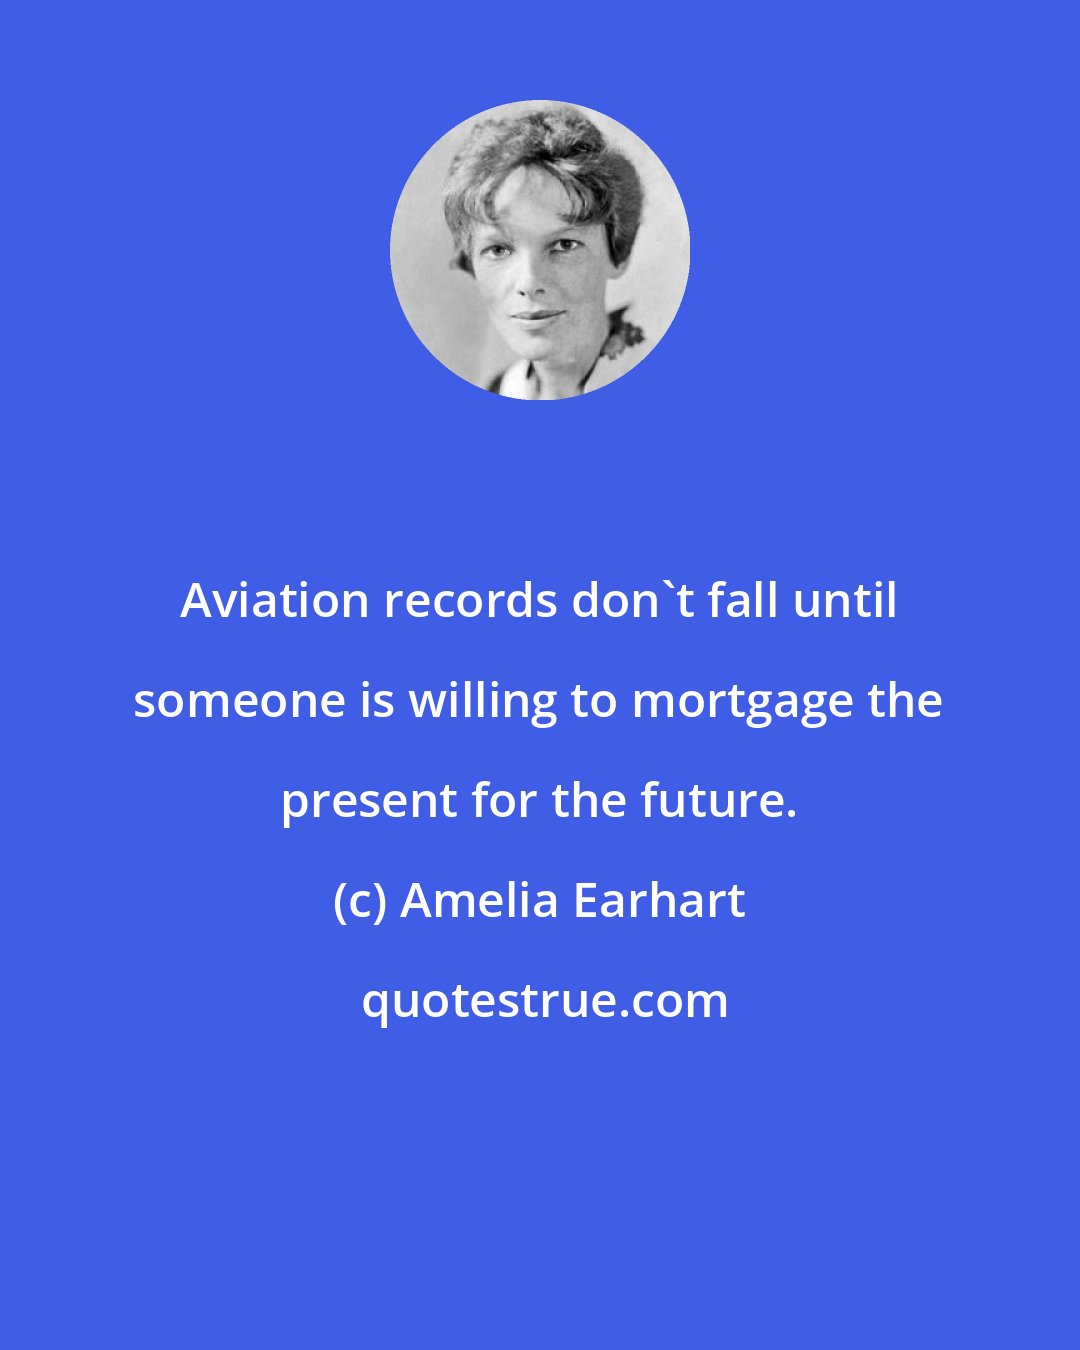 Amelia Earhart: Aviation records don't fall until someone is willing to mortgage the present for the future.